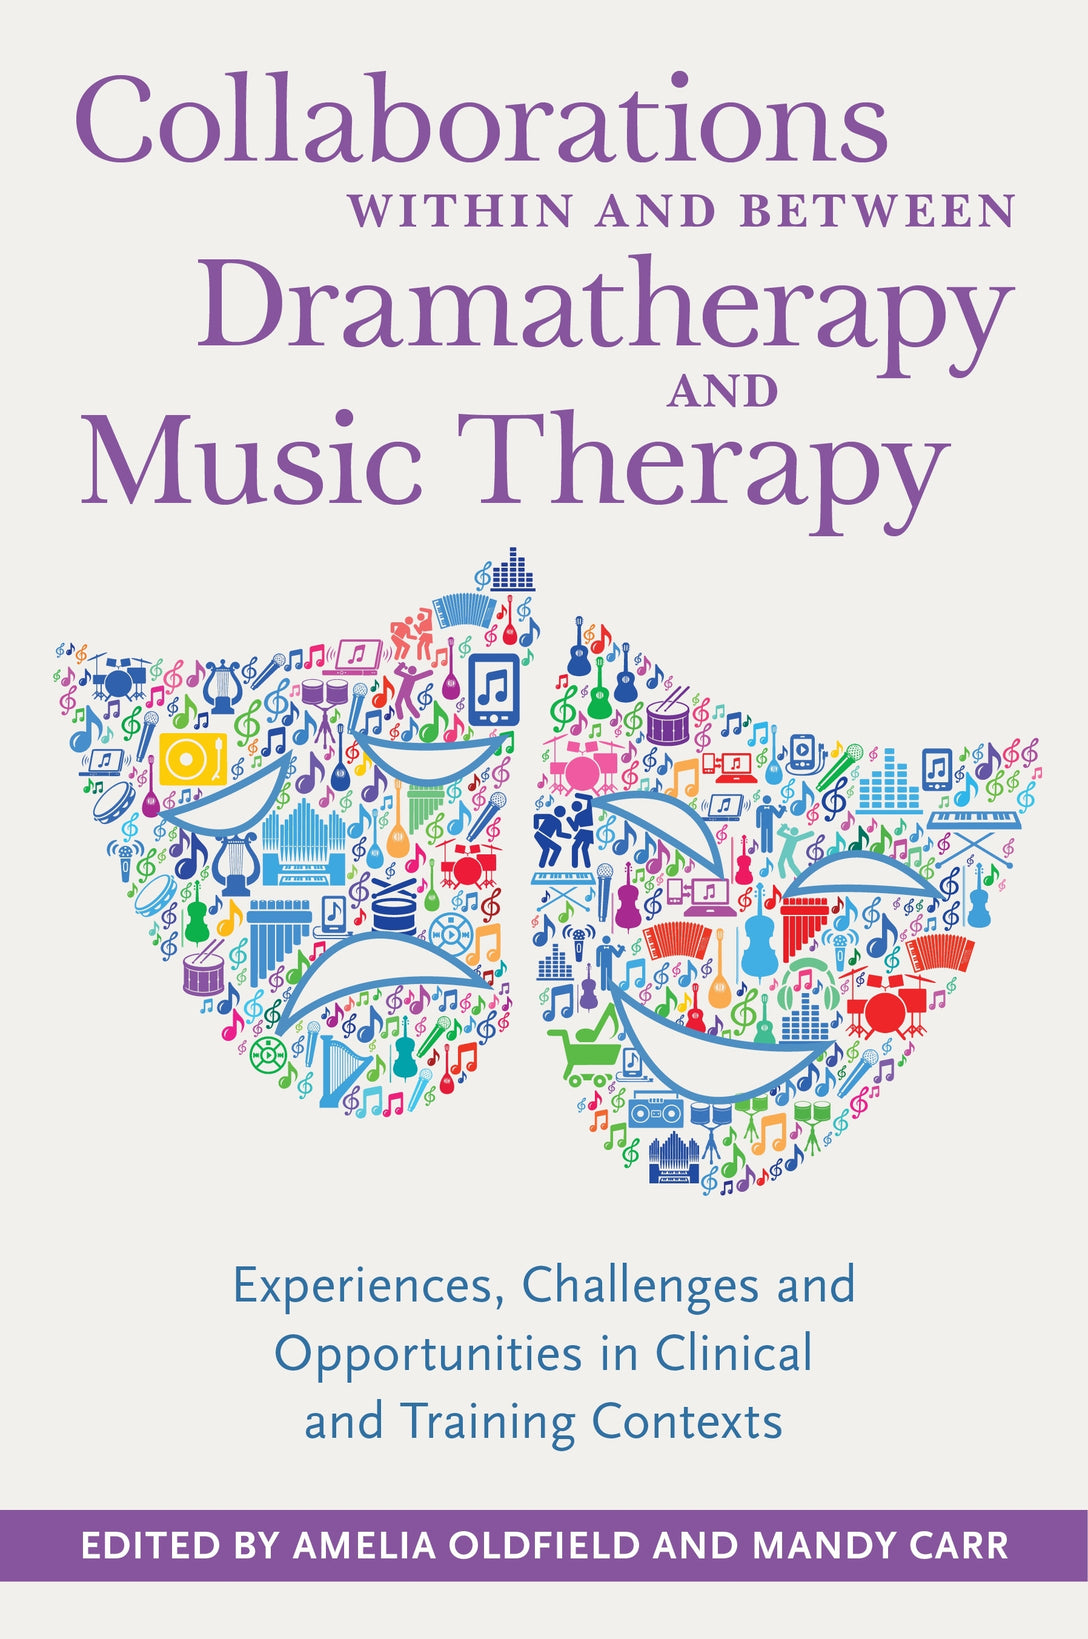 Collaborations Within and Between Dramatherapy and Music Therapy by No Author Listed, Amelia Oldfield, Rebecca Applin Warner, Amanda Carr